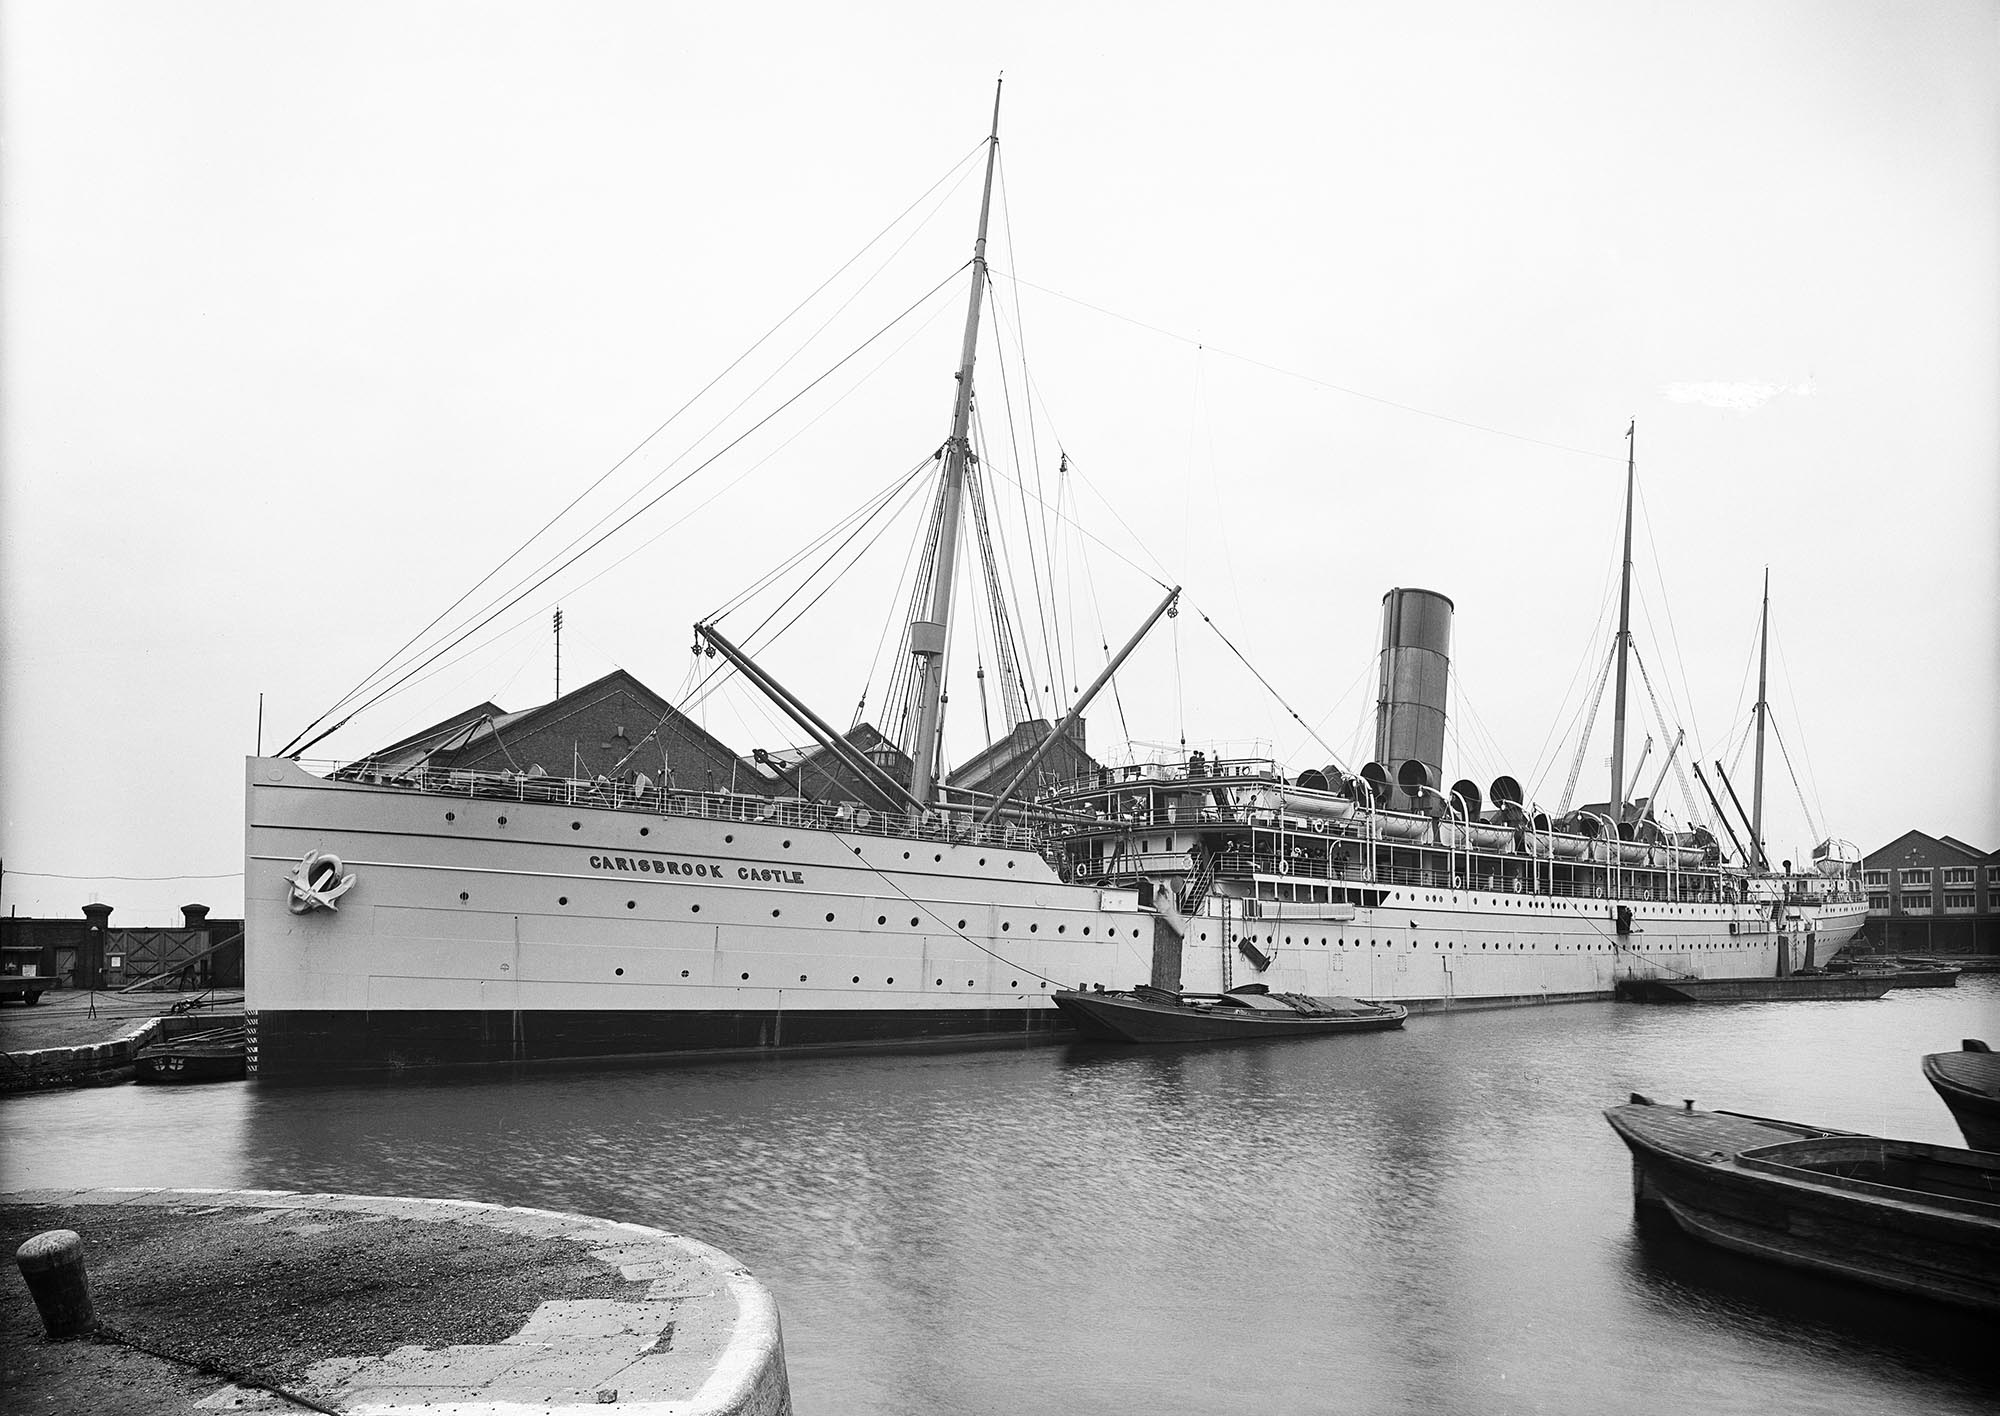 View of SS Carisbrook Castle in port with a tug alongside